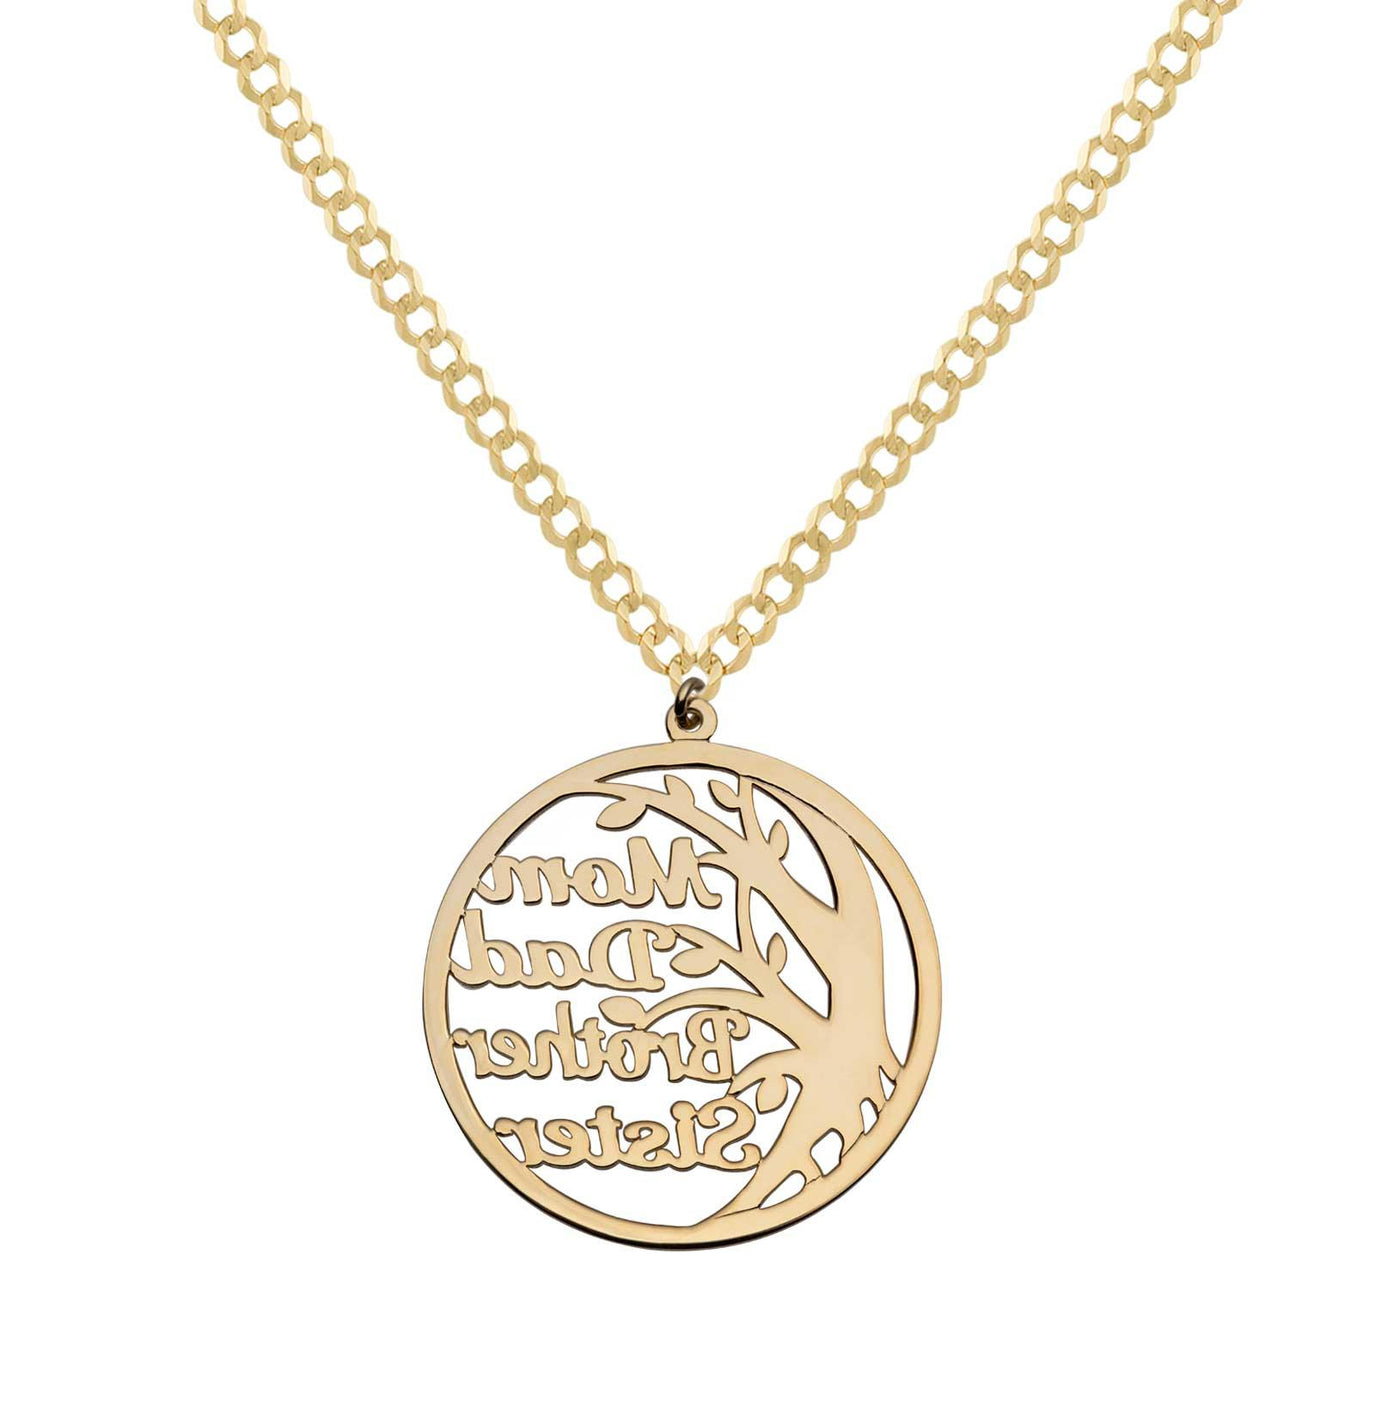 Ladies Family Tree Name Plate Necklace 14K Gold - Style 136 - bayamjewelry